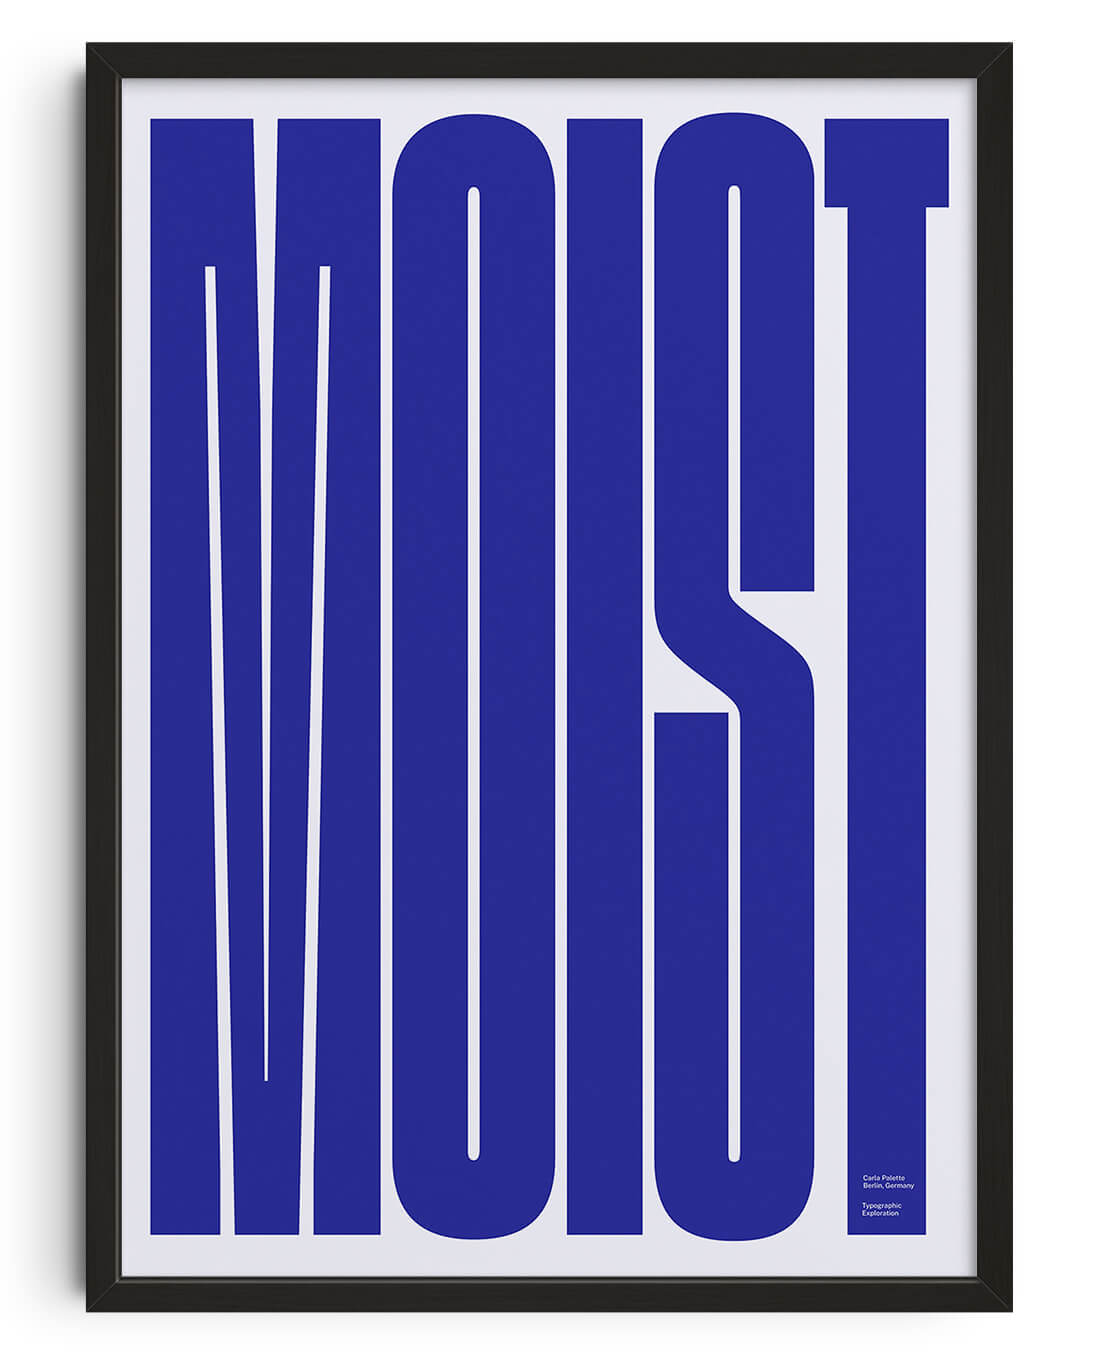 11.7x16.5" (A3) MOIST - UNFRAMED contemporary wall art print by Carla Palette - sold by DROOL